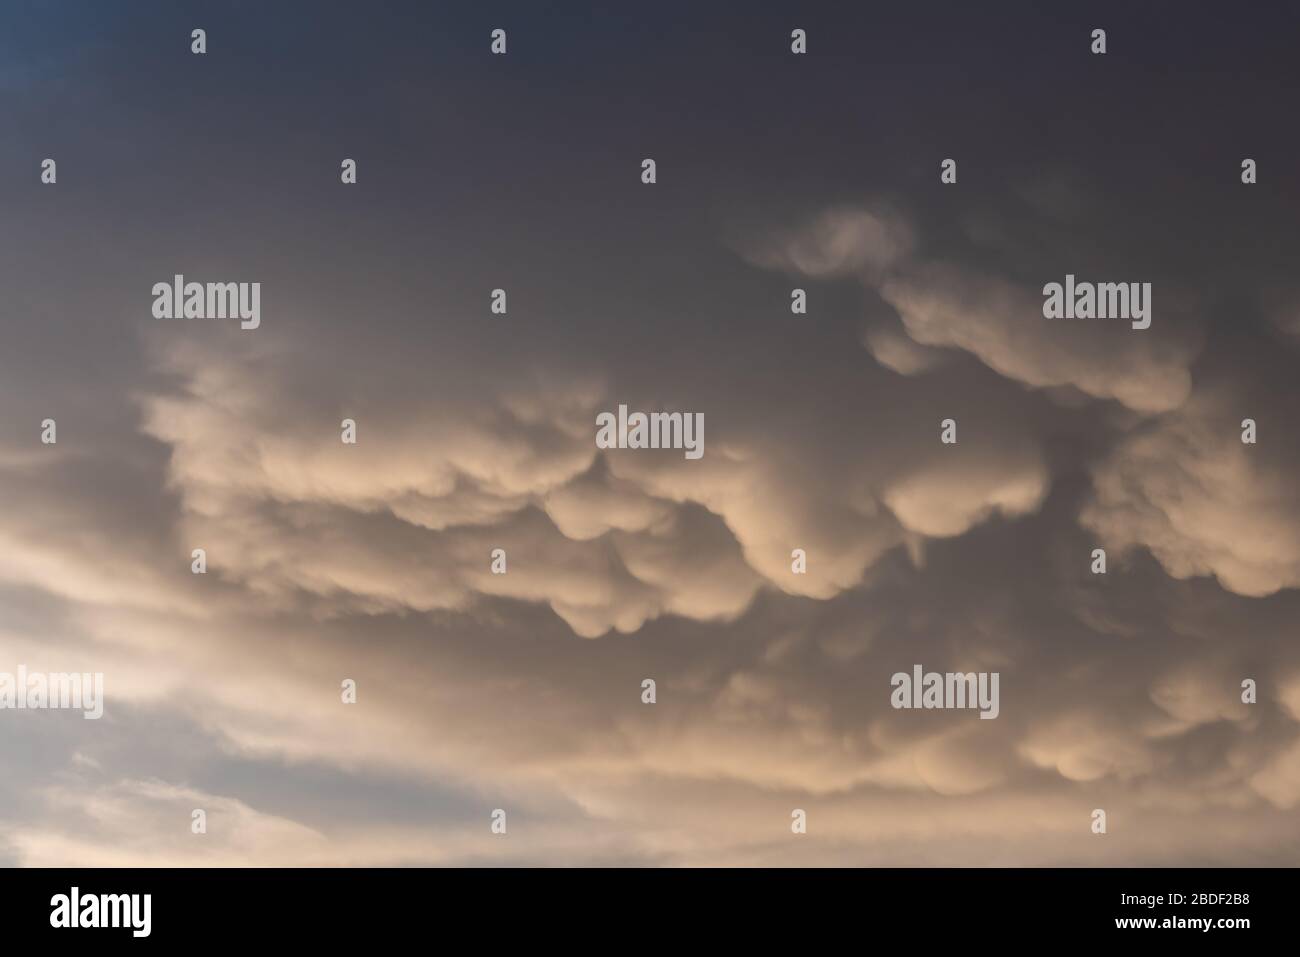 Mammoth or mastodon clouds over the sky with warm tones Stock Photo